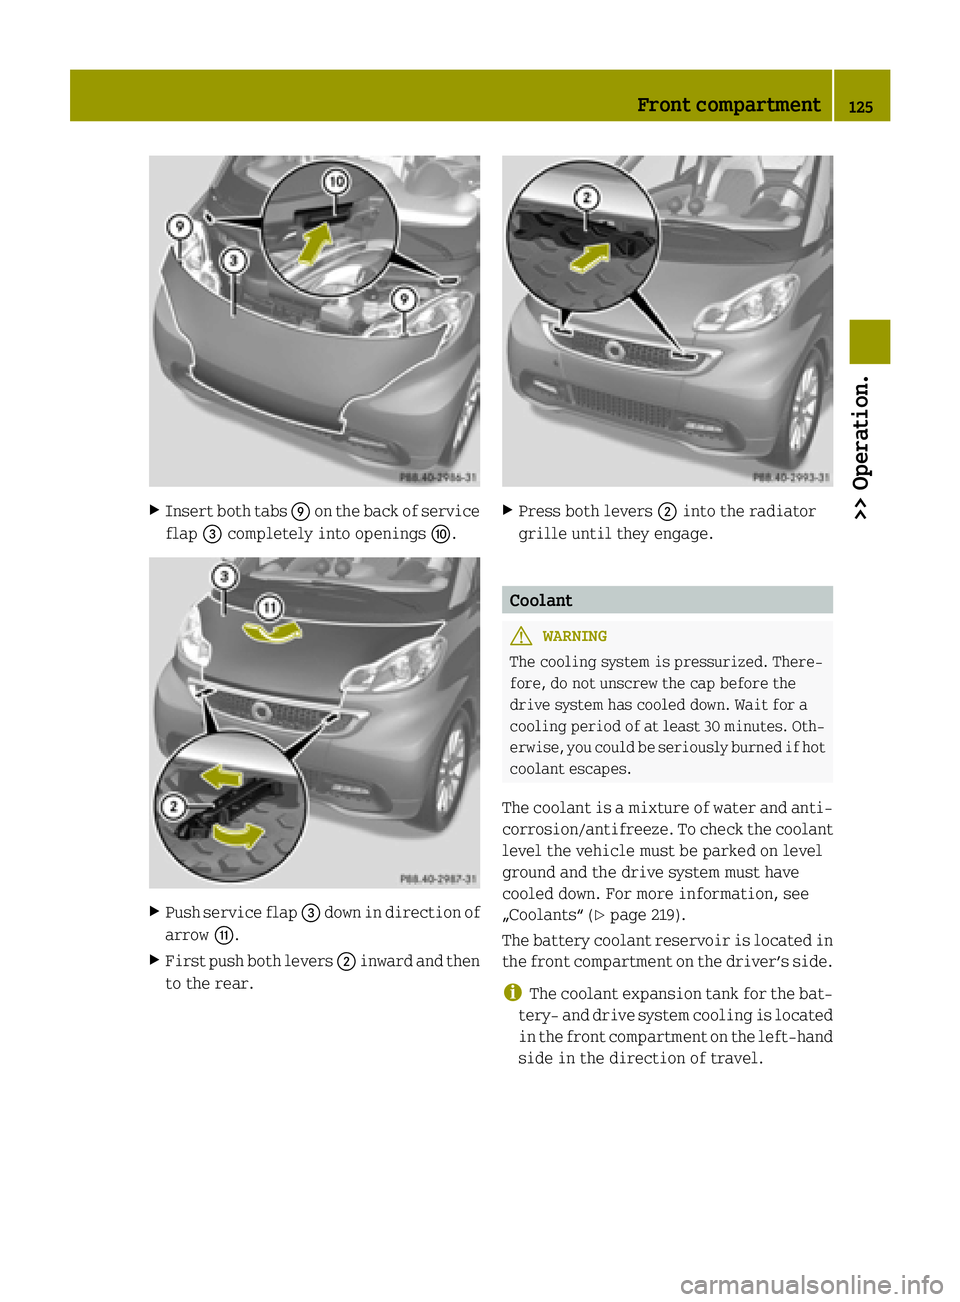 SMART FORTWO COUPE ELECTRIC DRIVE 2015  Owners Manual X
Insert both tabs Eon the back of service
flap =completely into openings F.X
Push service flap =down in direction of
arrow G.
X First push both levers ;inward and then
to the rear. X
Press both lever